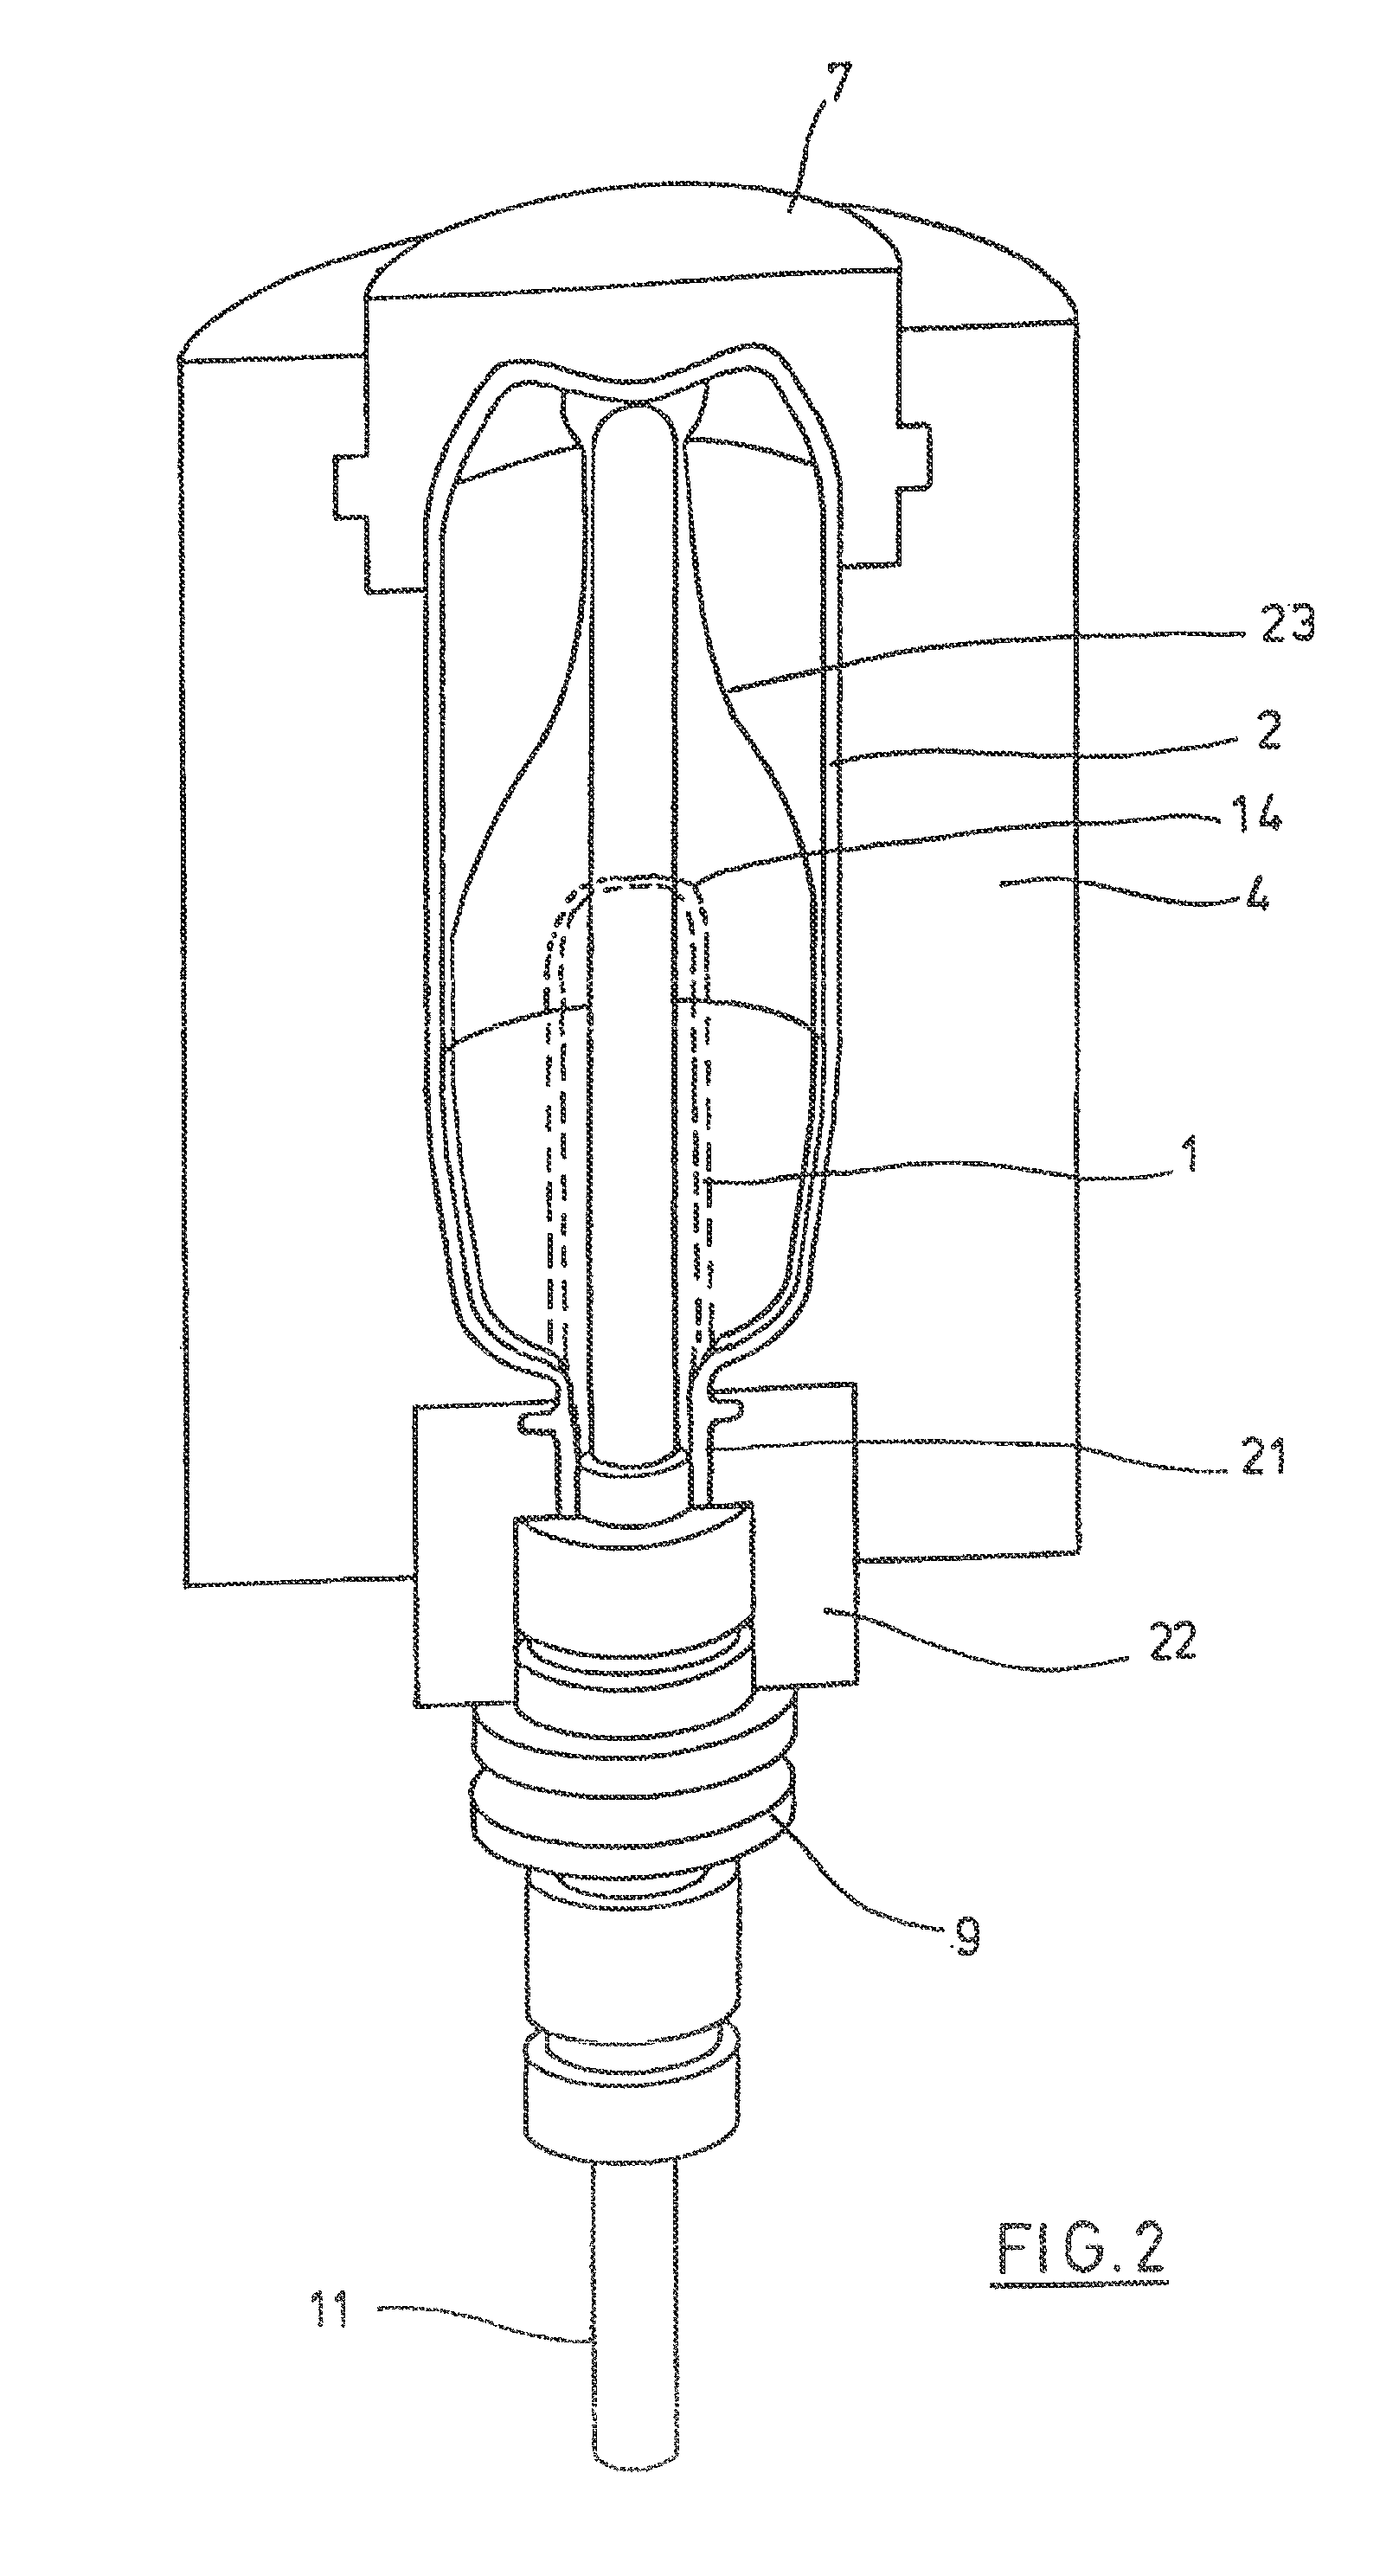 Method and apparatus for blow-molding containers